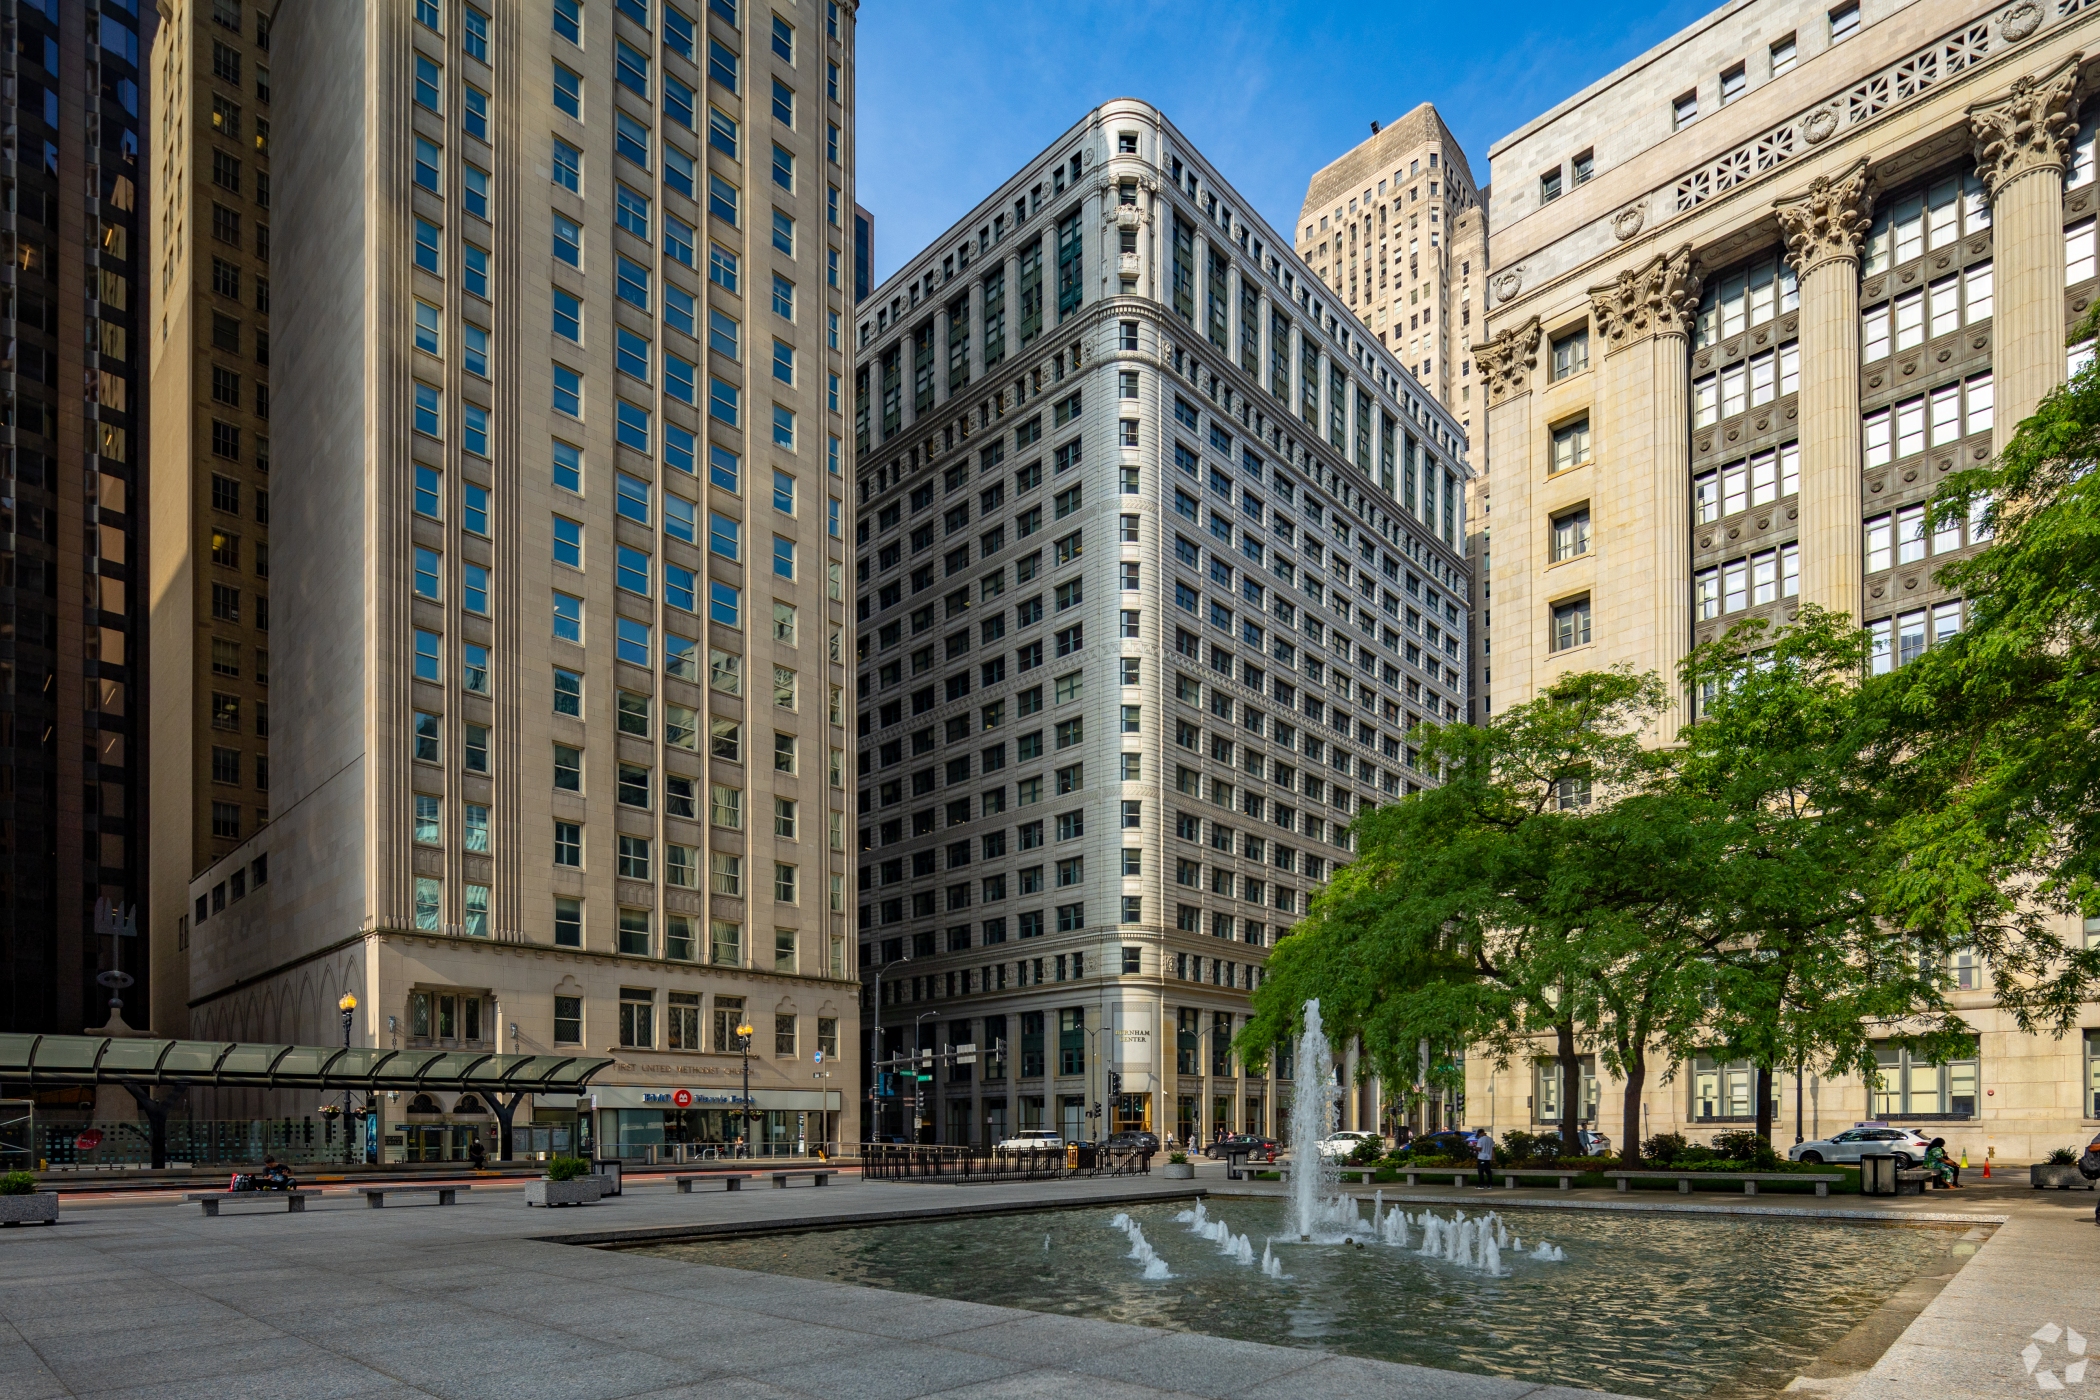 A nonprofit venture called Farm Zero wants to grow basil and other produce in former office space within the Burnham Center in Chicago, center. It is across from City Hall, at right. (Robert Gigliotti/CoStar)